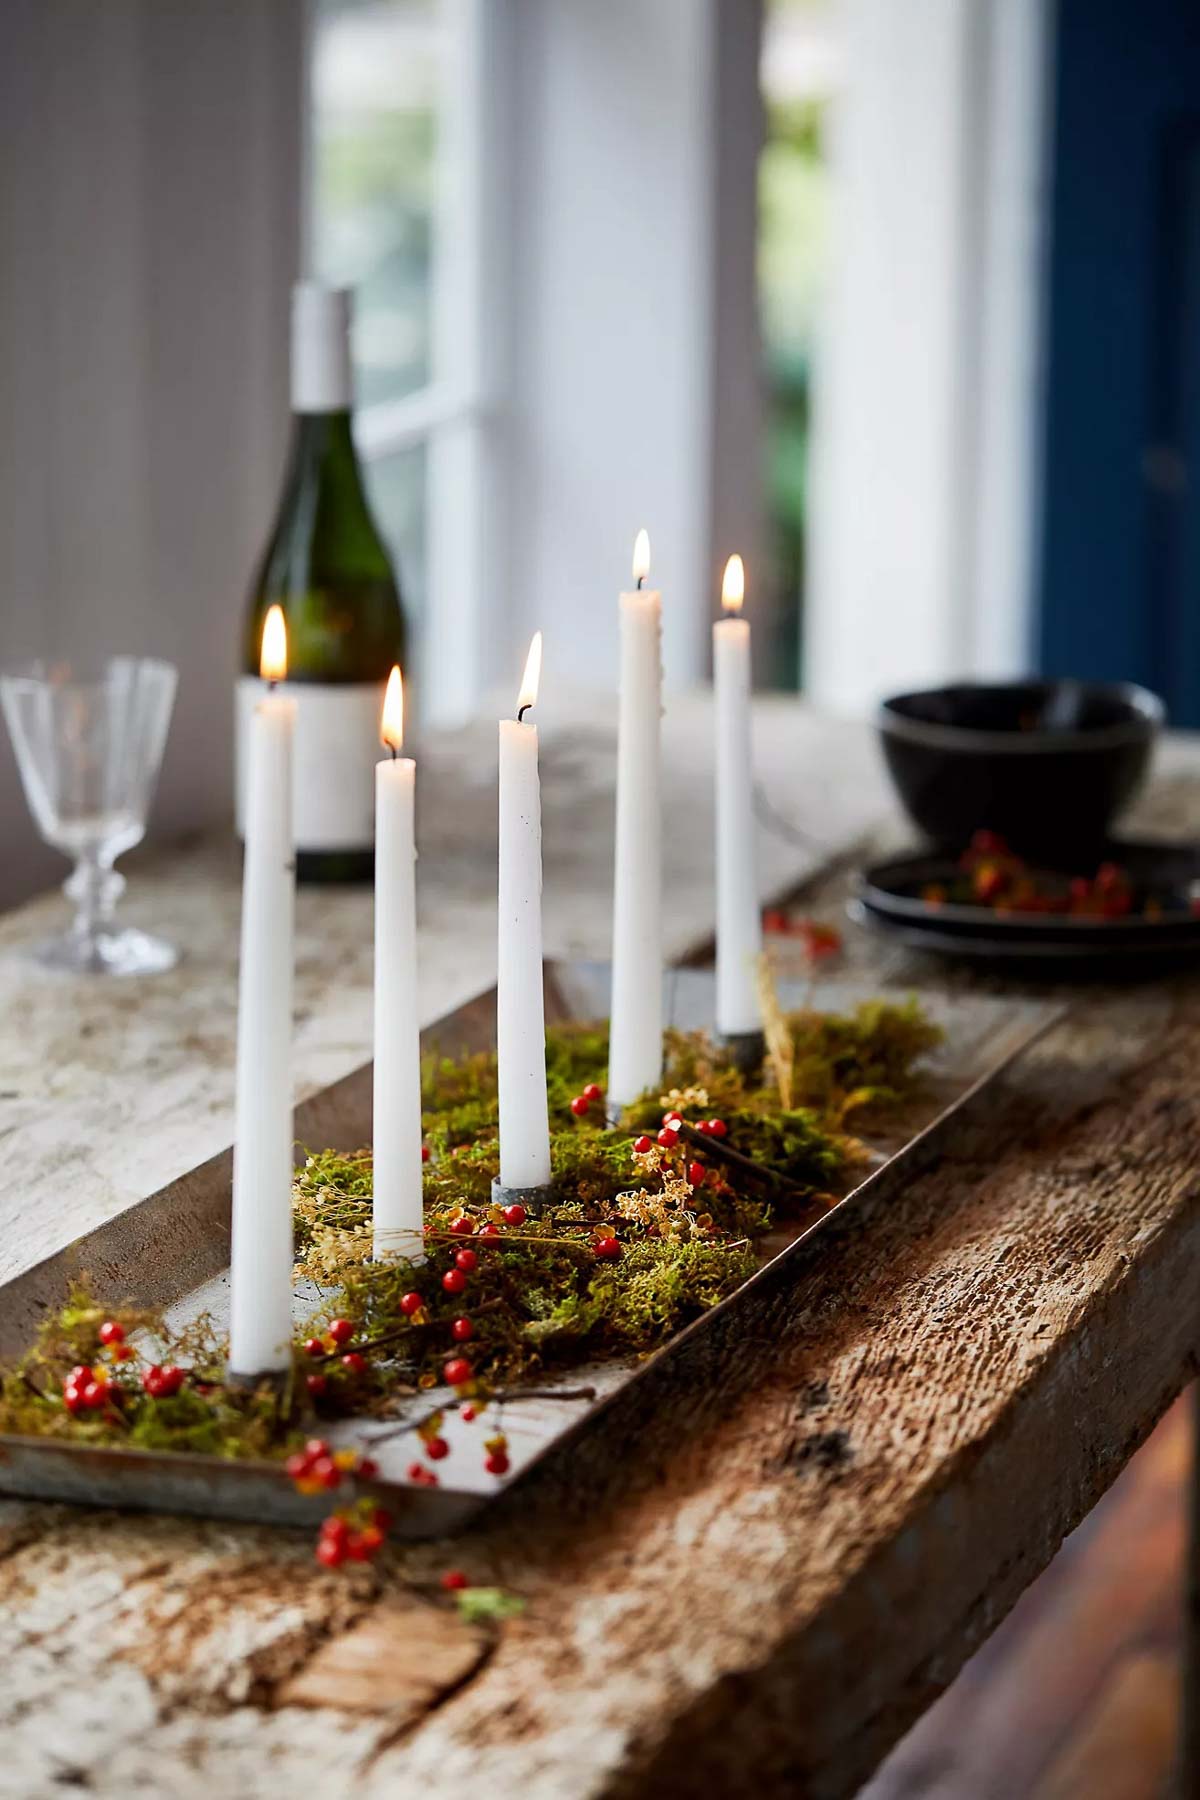 Candlestick trough to use as a centerpiece